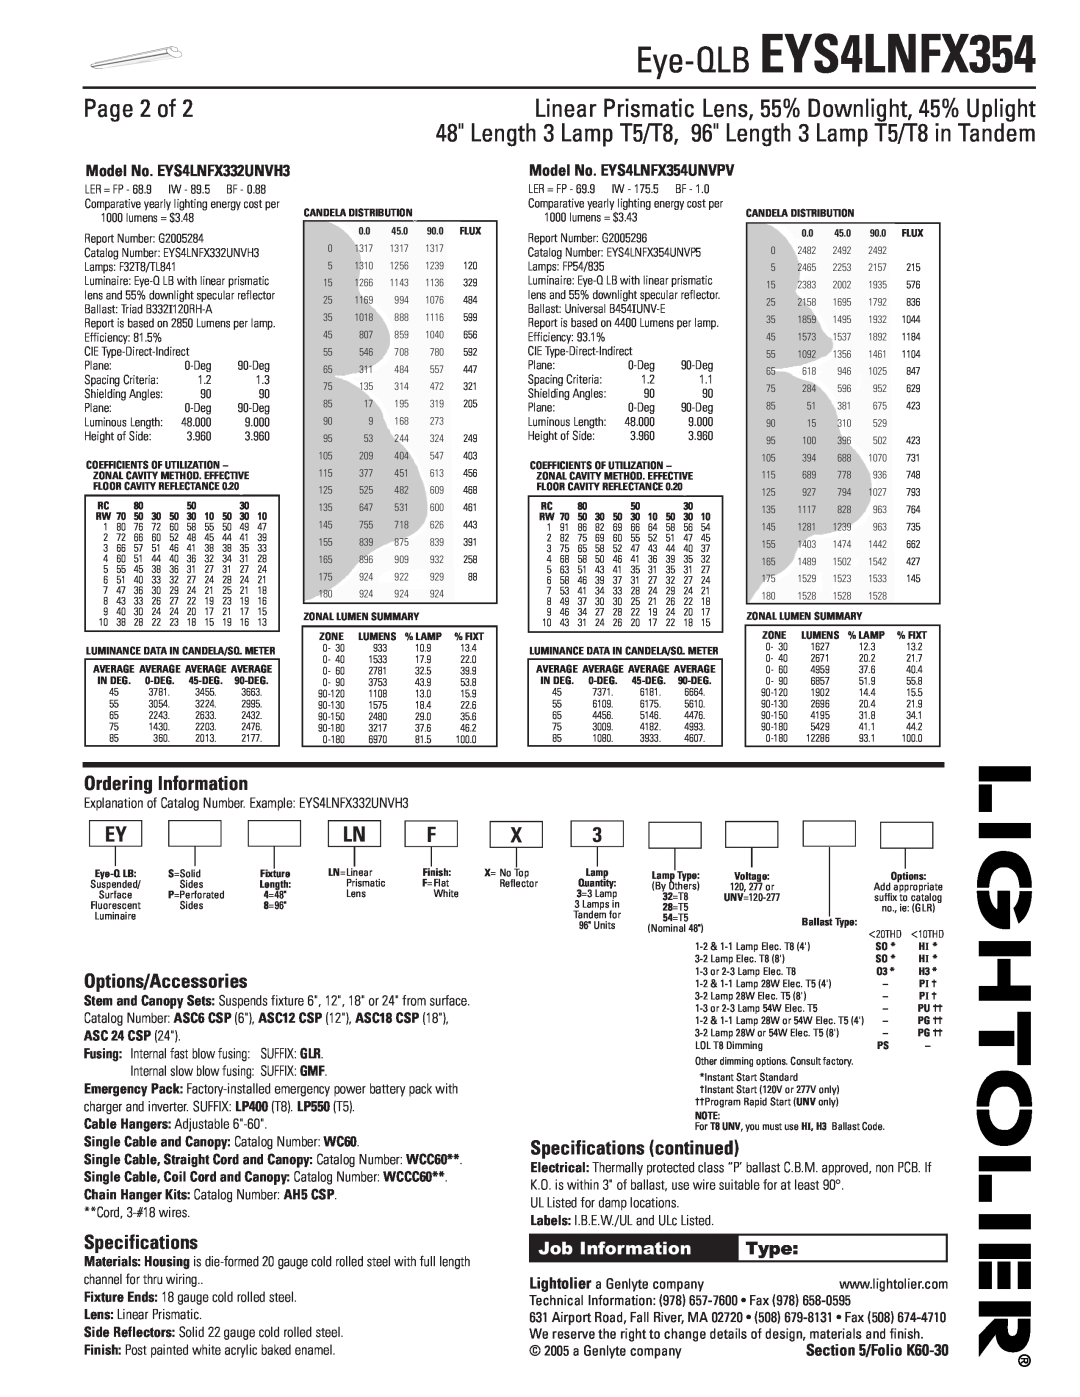 Lightolier Page 2 of, Ordering Information, Options/Accessories, Specifications continued, Eye-QLB EYS4LNFX354, Type 